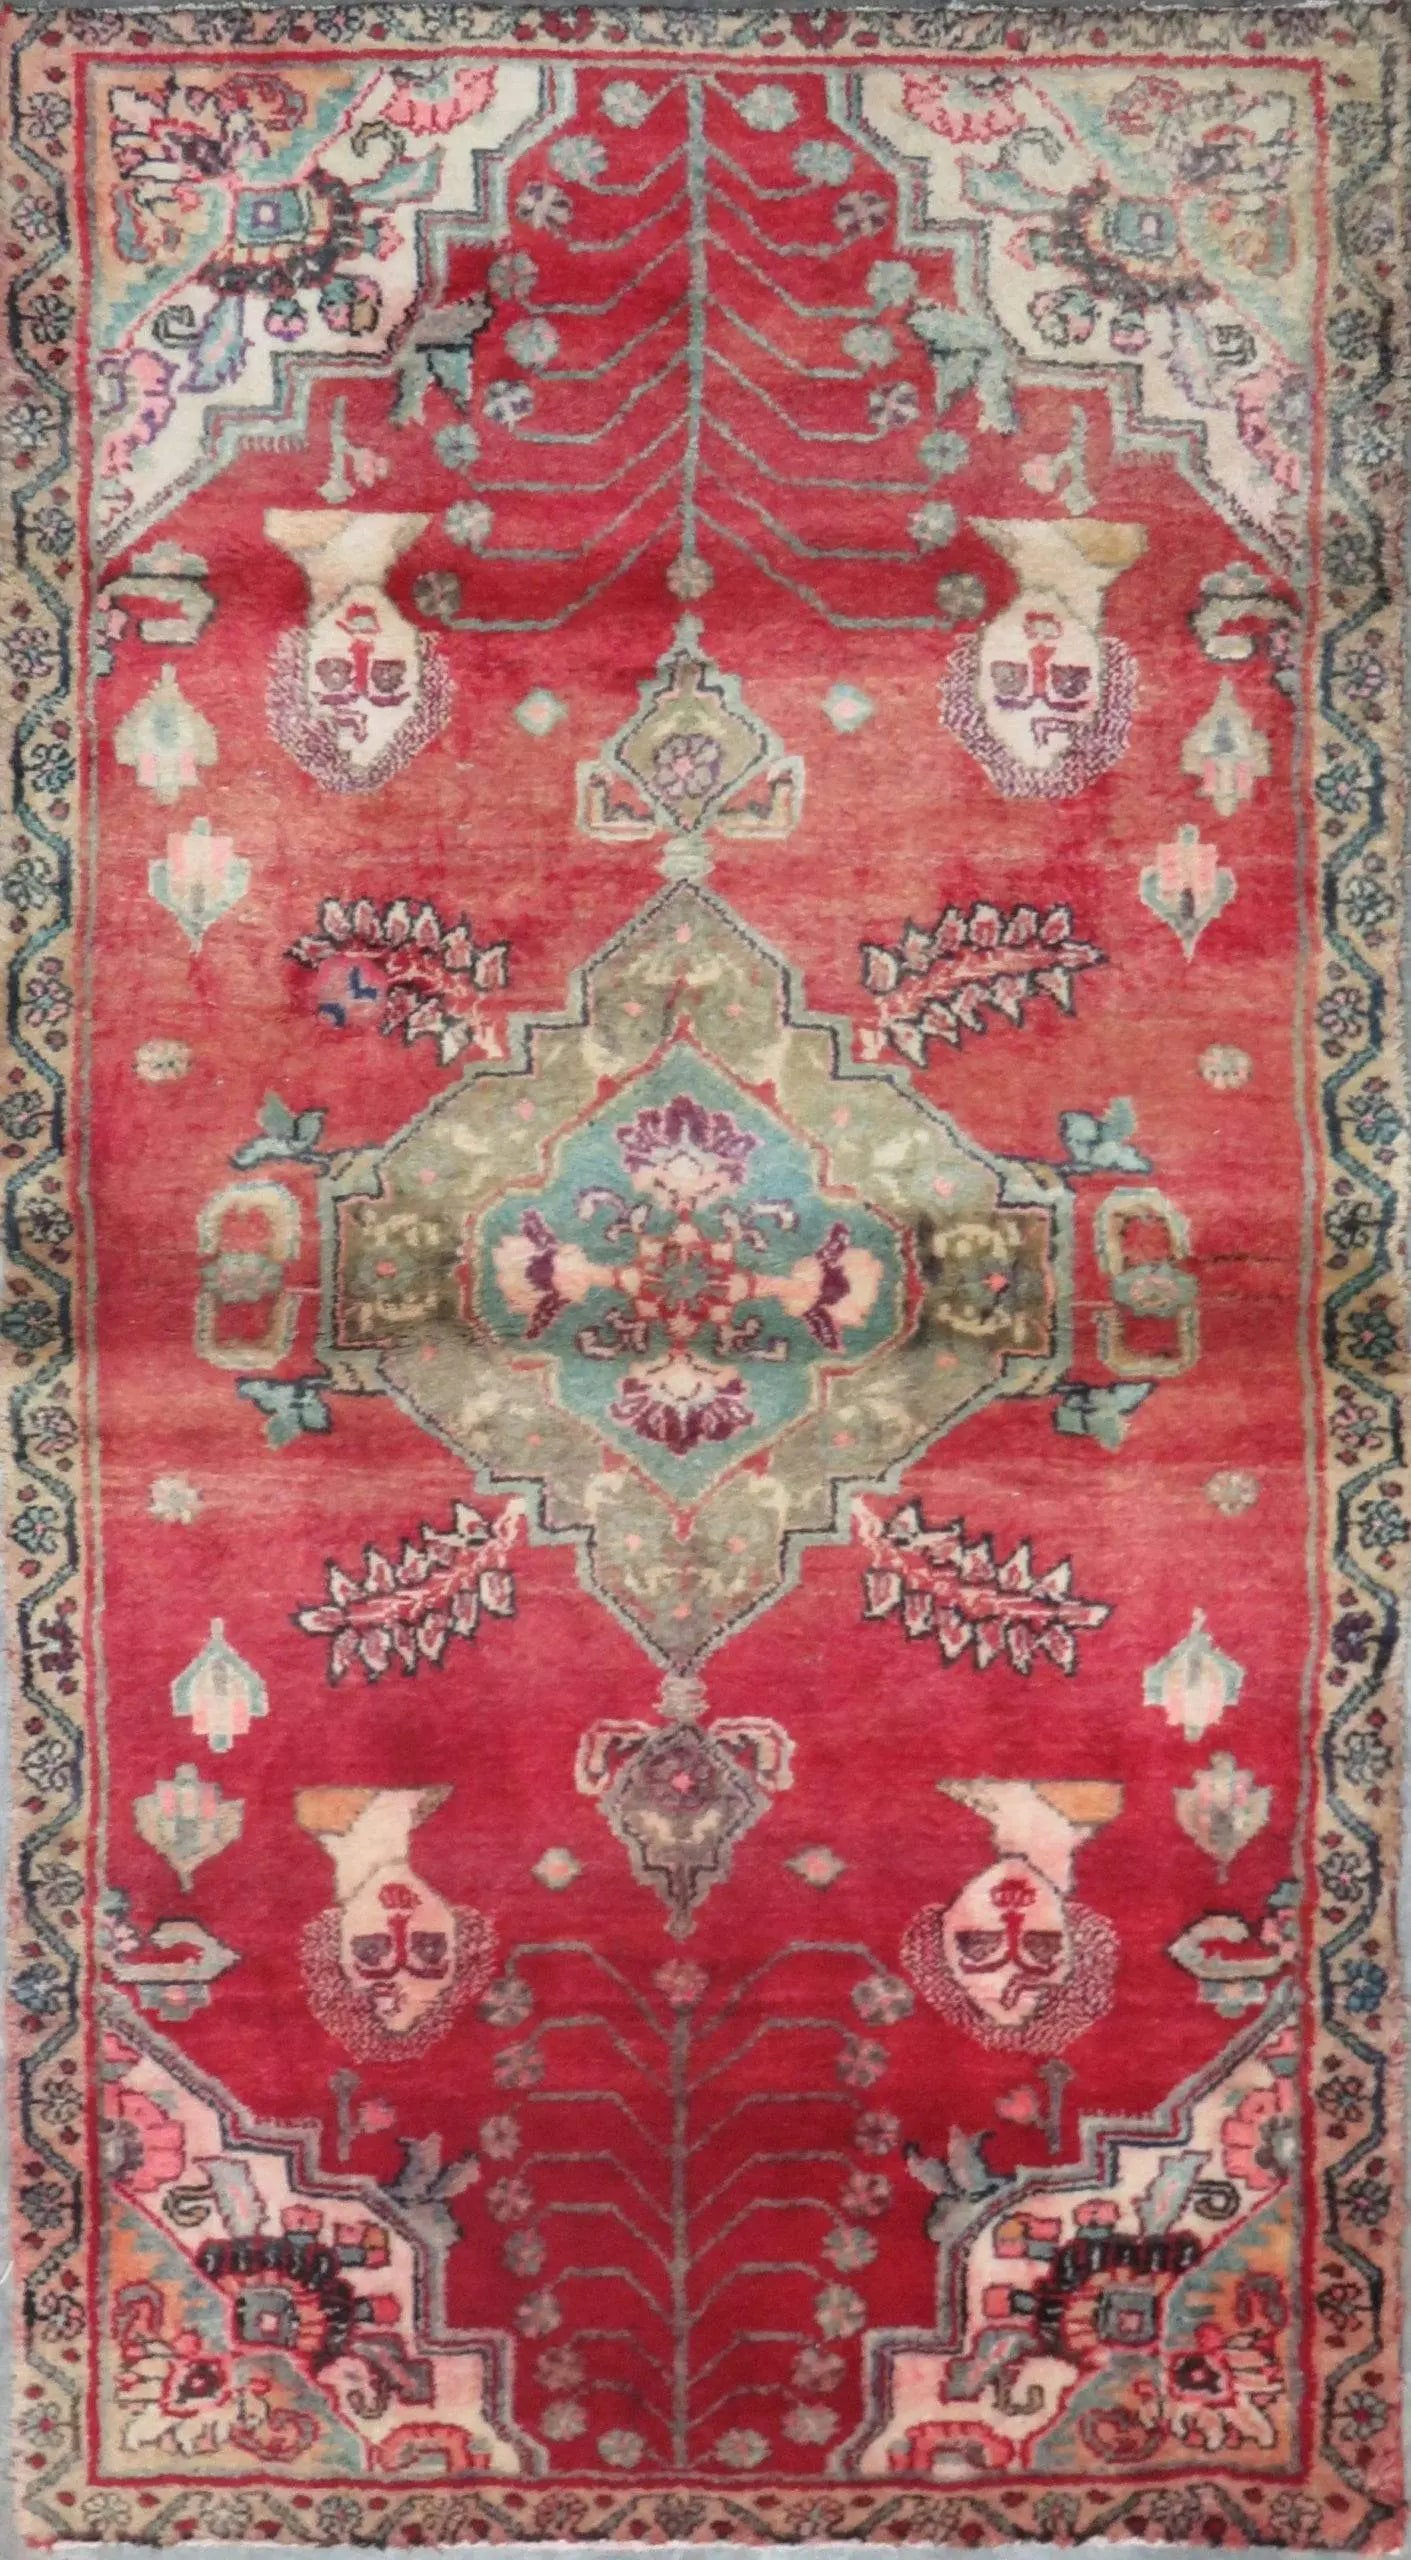 Hand-Knotted Persian Wool Rug _ Luxurious Vintage Design, 6'6" x 4'0", Artisan Crafted